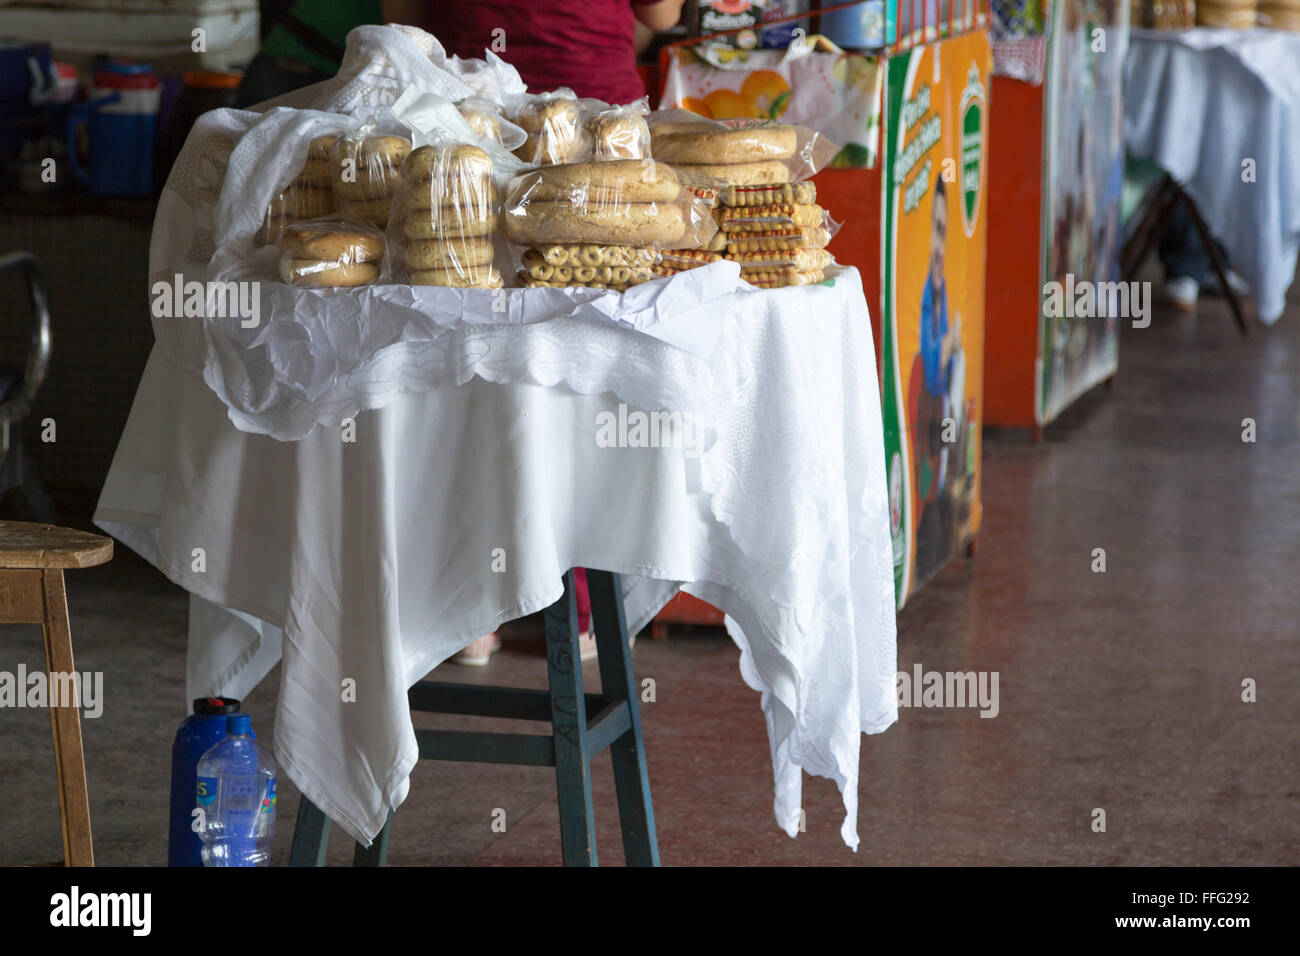 Asuncion, Paraguay. 13th February, 2016. Typical Paraguayan chipa are selling at the Terminal de Ómnibus de Asunción (Asuncion Bus Terminal), is seen during this sunny morning in Asuncion, Paraguay. Chipa is a type of baked, cheese-flavored rolls, a traditional snack and breakfast food in Paraguay. © Andre M. Chang/ARDUOPRESS/Alamy Live News Stock Photo